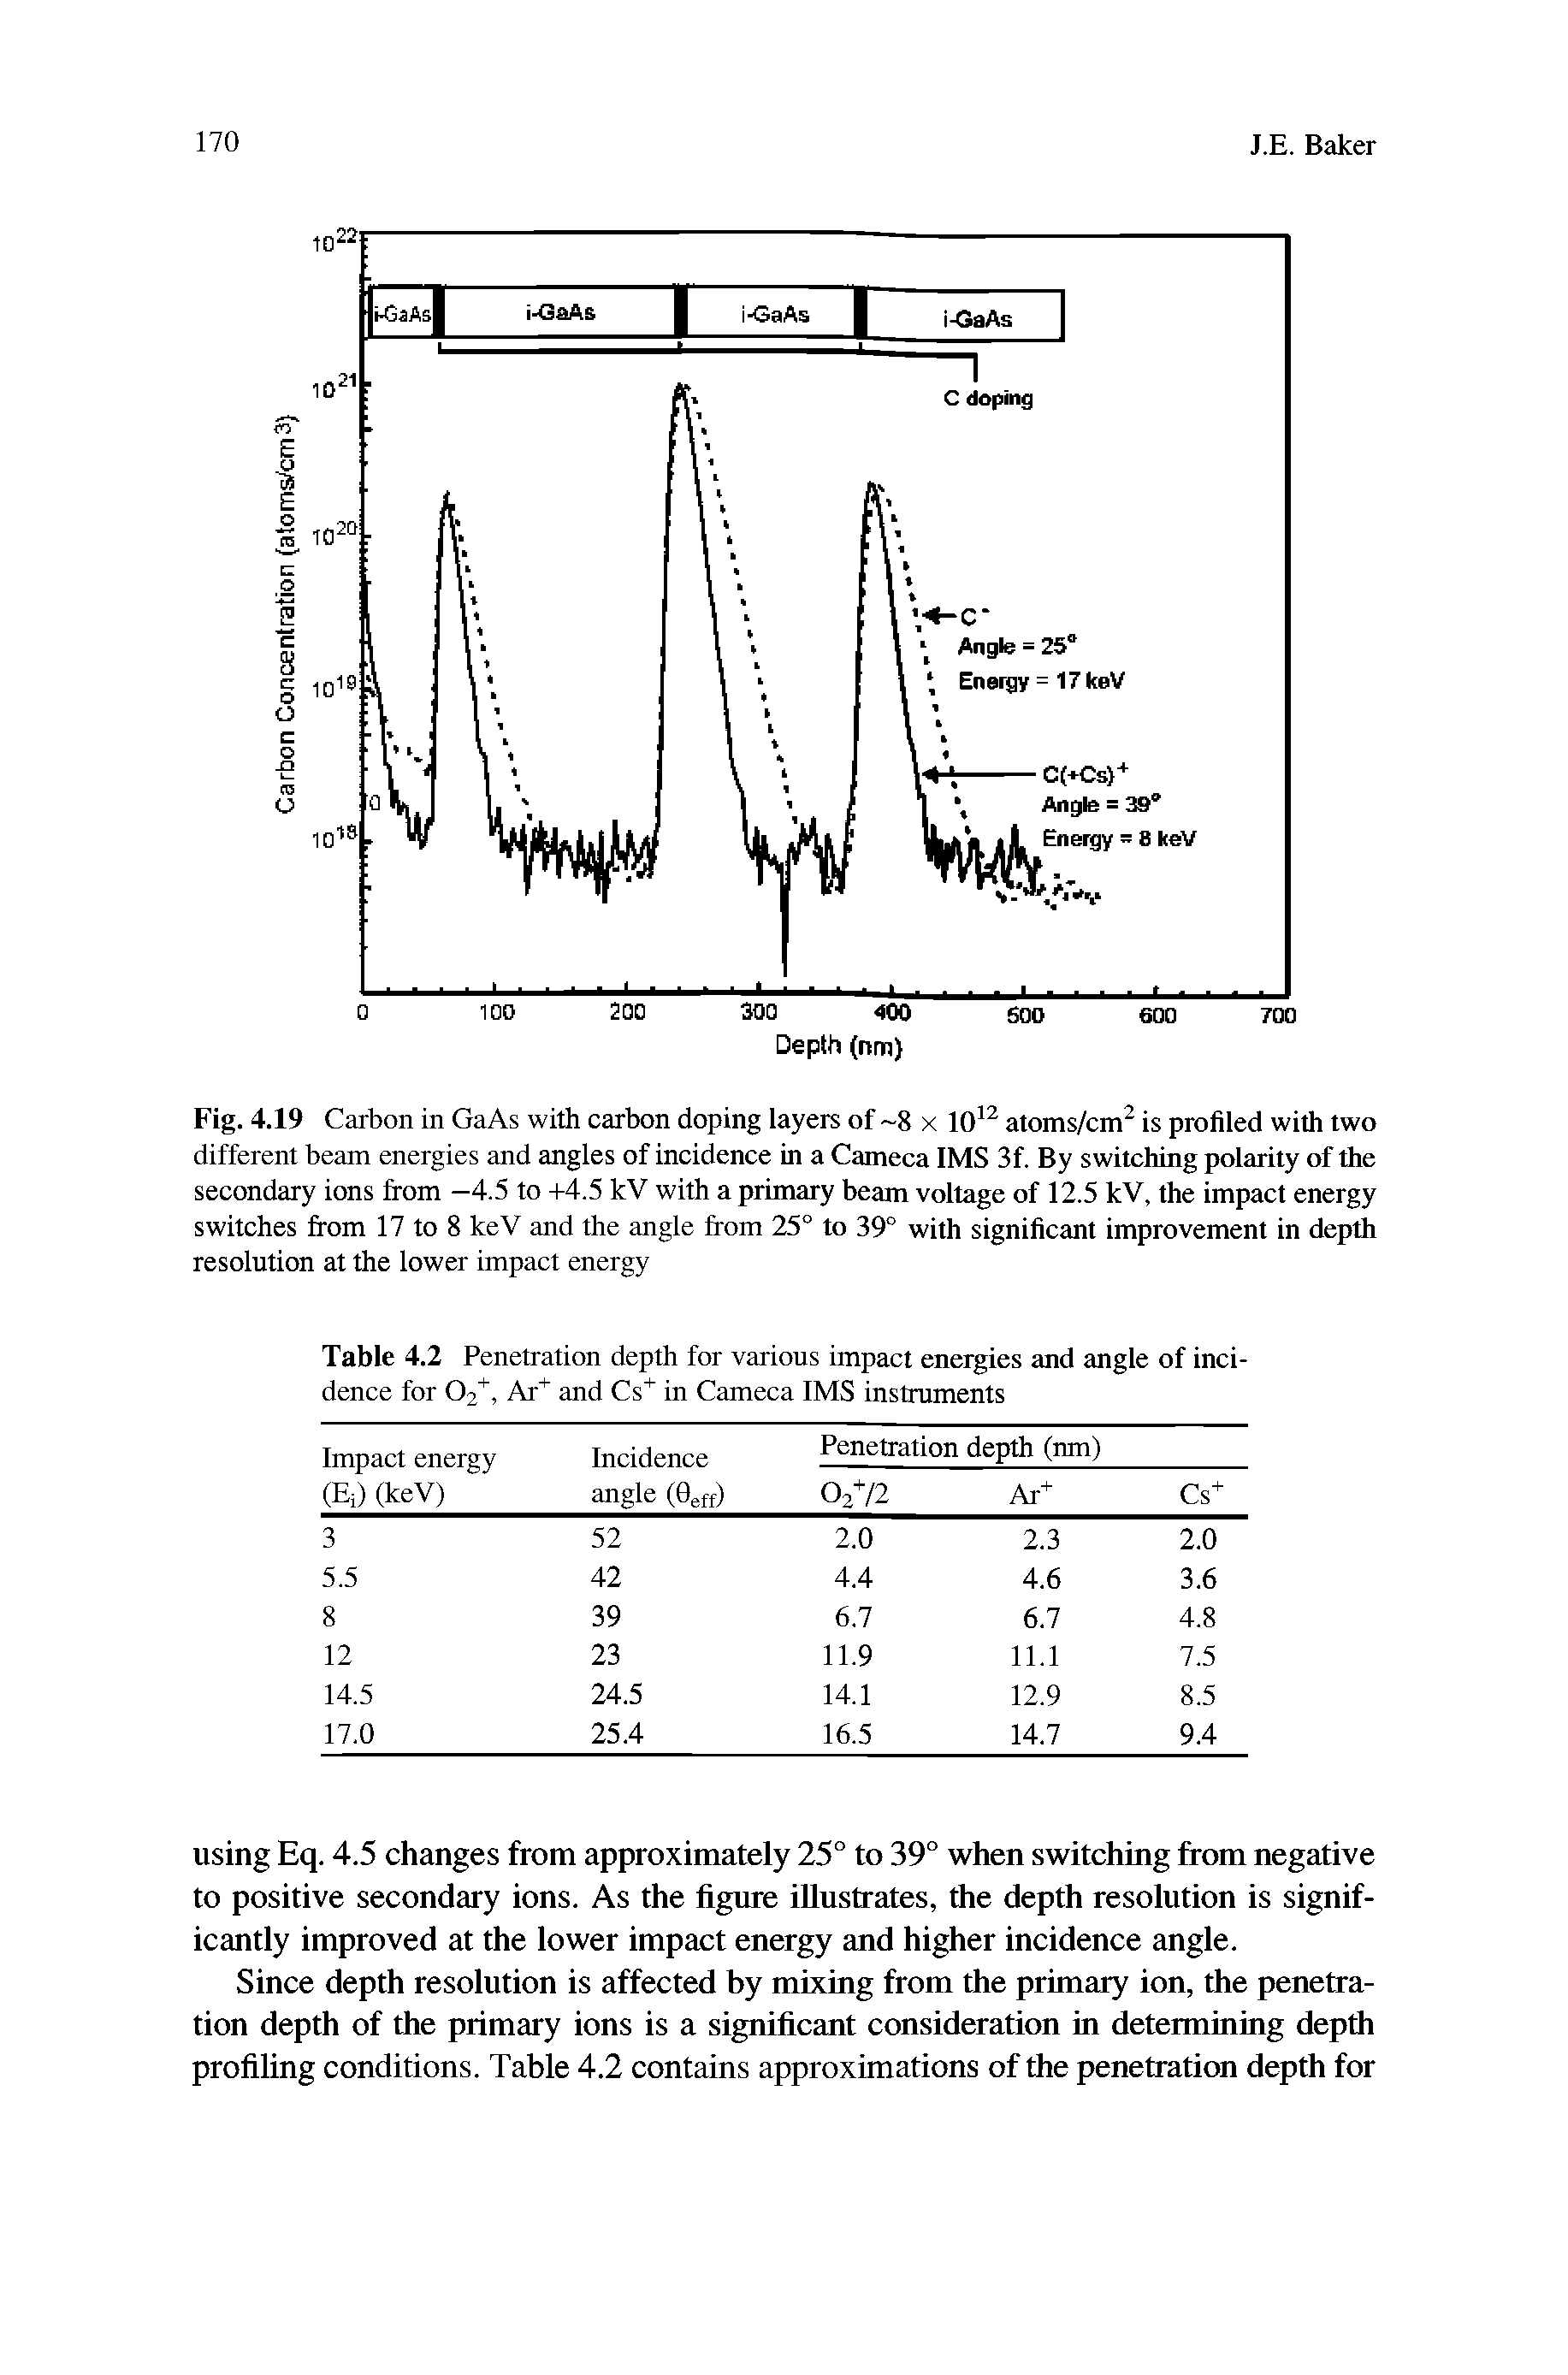 Fig. 4.19 Carbon in GaAs with carbon doping layers of 8 x lO atoms/cm is profiled with two different beam energies and angles of incidence in a Cameca IMS 3f. By switching polarity of the secondary ions from -4.5 to +4.5 kV with a primary beam voltage of 12.5 kV, the impact energy switches from 17 to 8 keV and the angle from 25° to 39° with significant improvement in depth resolution at the lower impact energy...